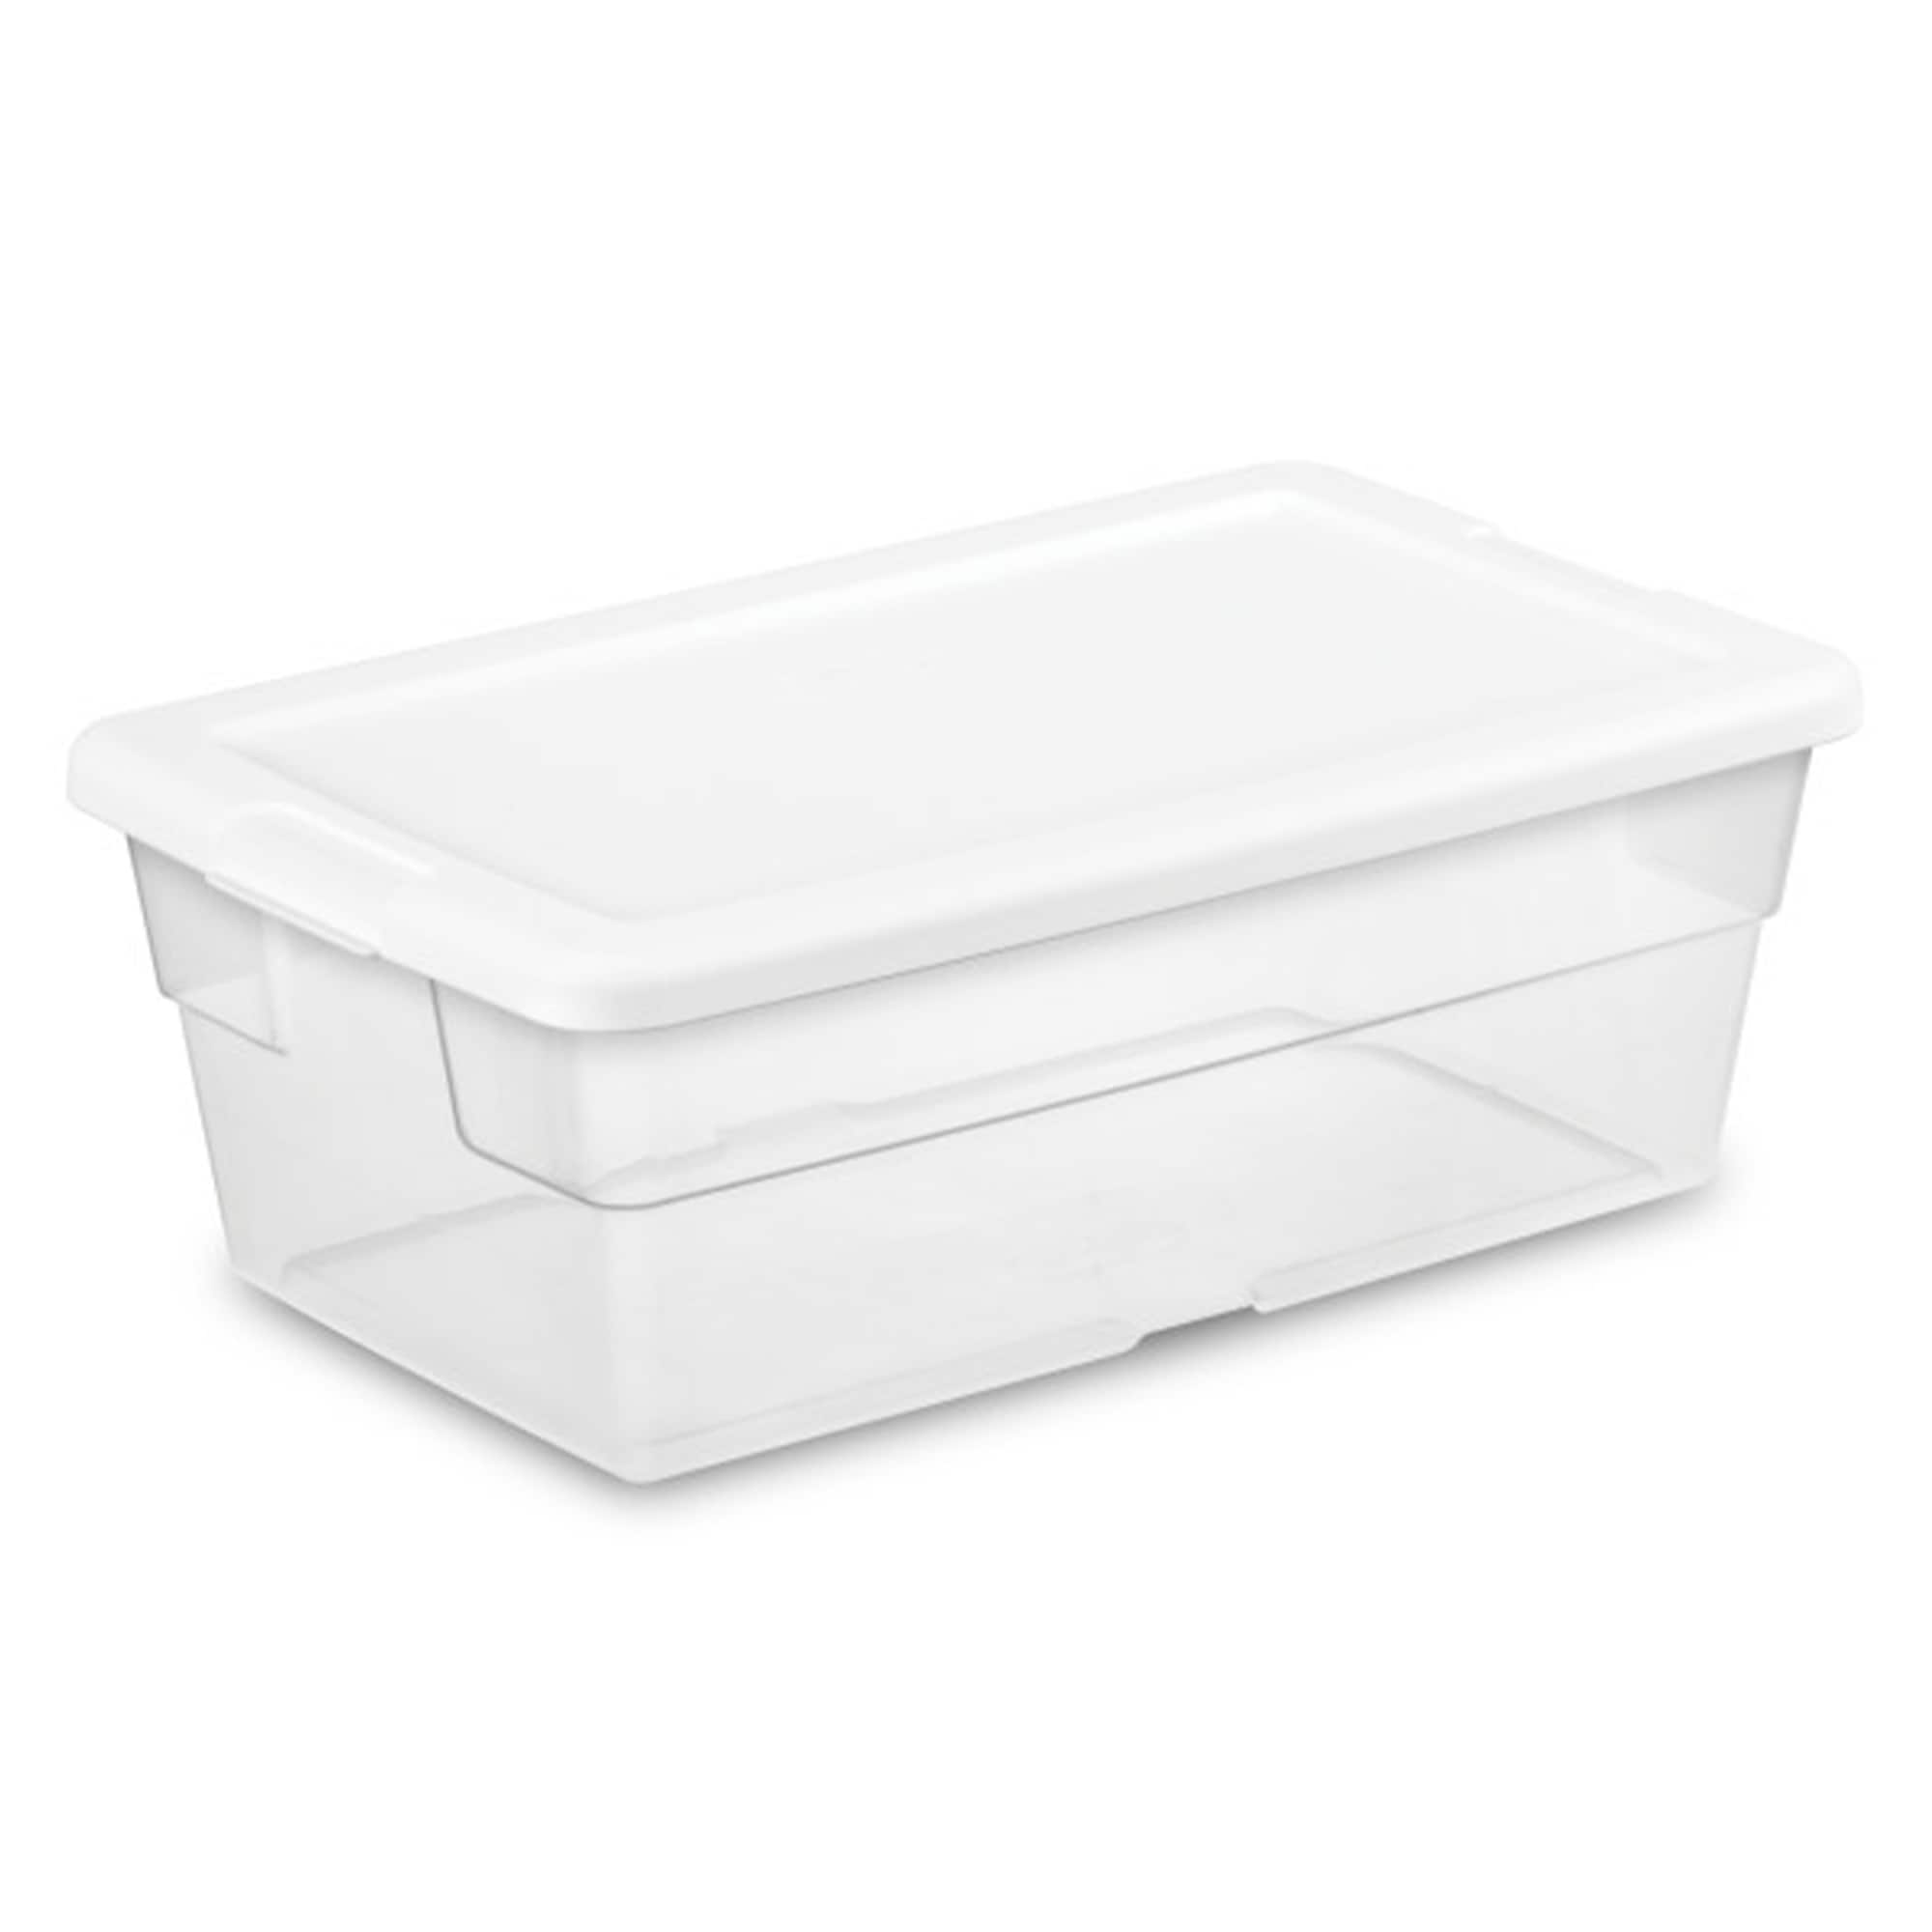 https://ak1.ostkcdn.com/images/products/is/images/direct/6172450b2db58d3096db5f01a44ae68a32d1b1db/Sterilite-6-Qt-Clear-Plastic-Storage-Container-Bin-Snap-Close-White-Lid%2C-36-Pack.jpg